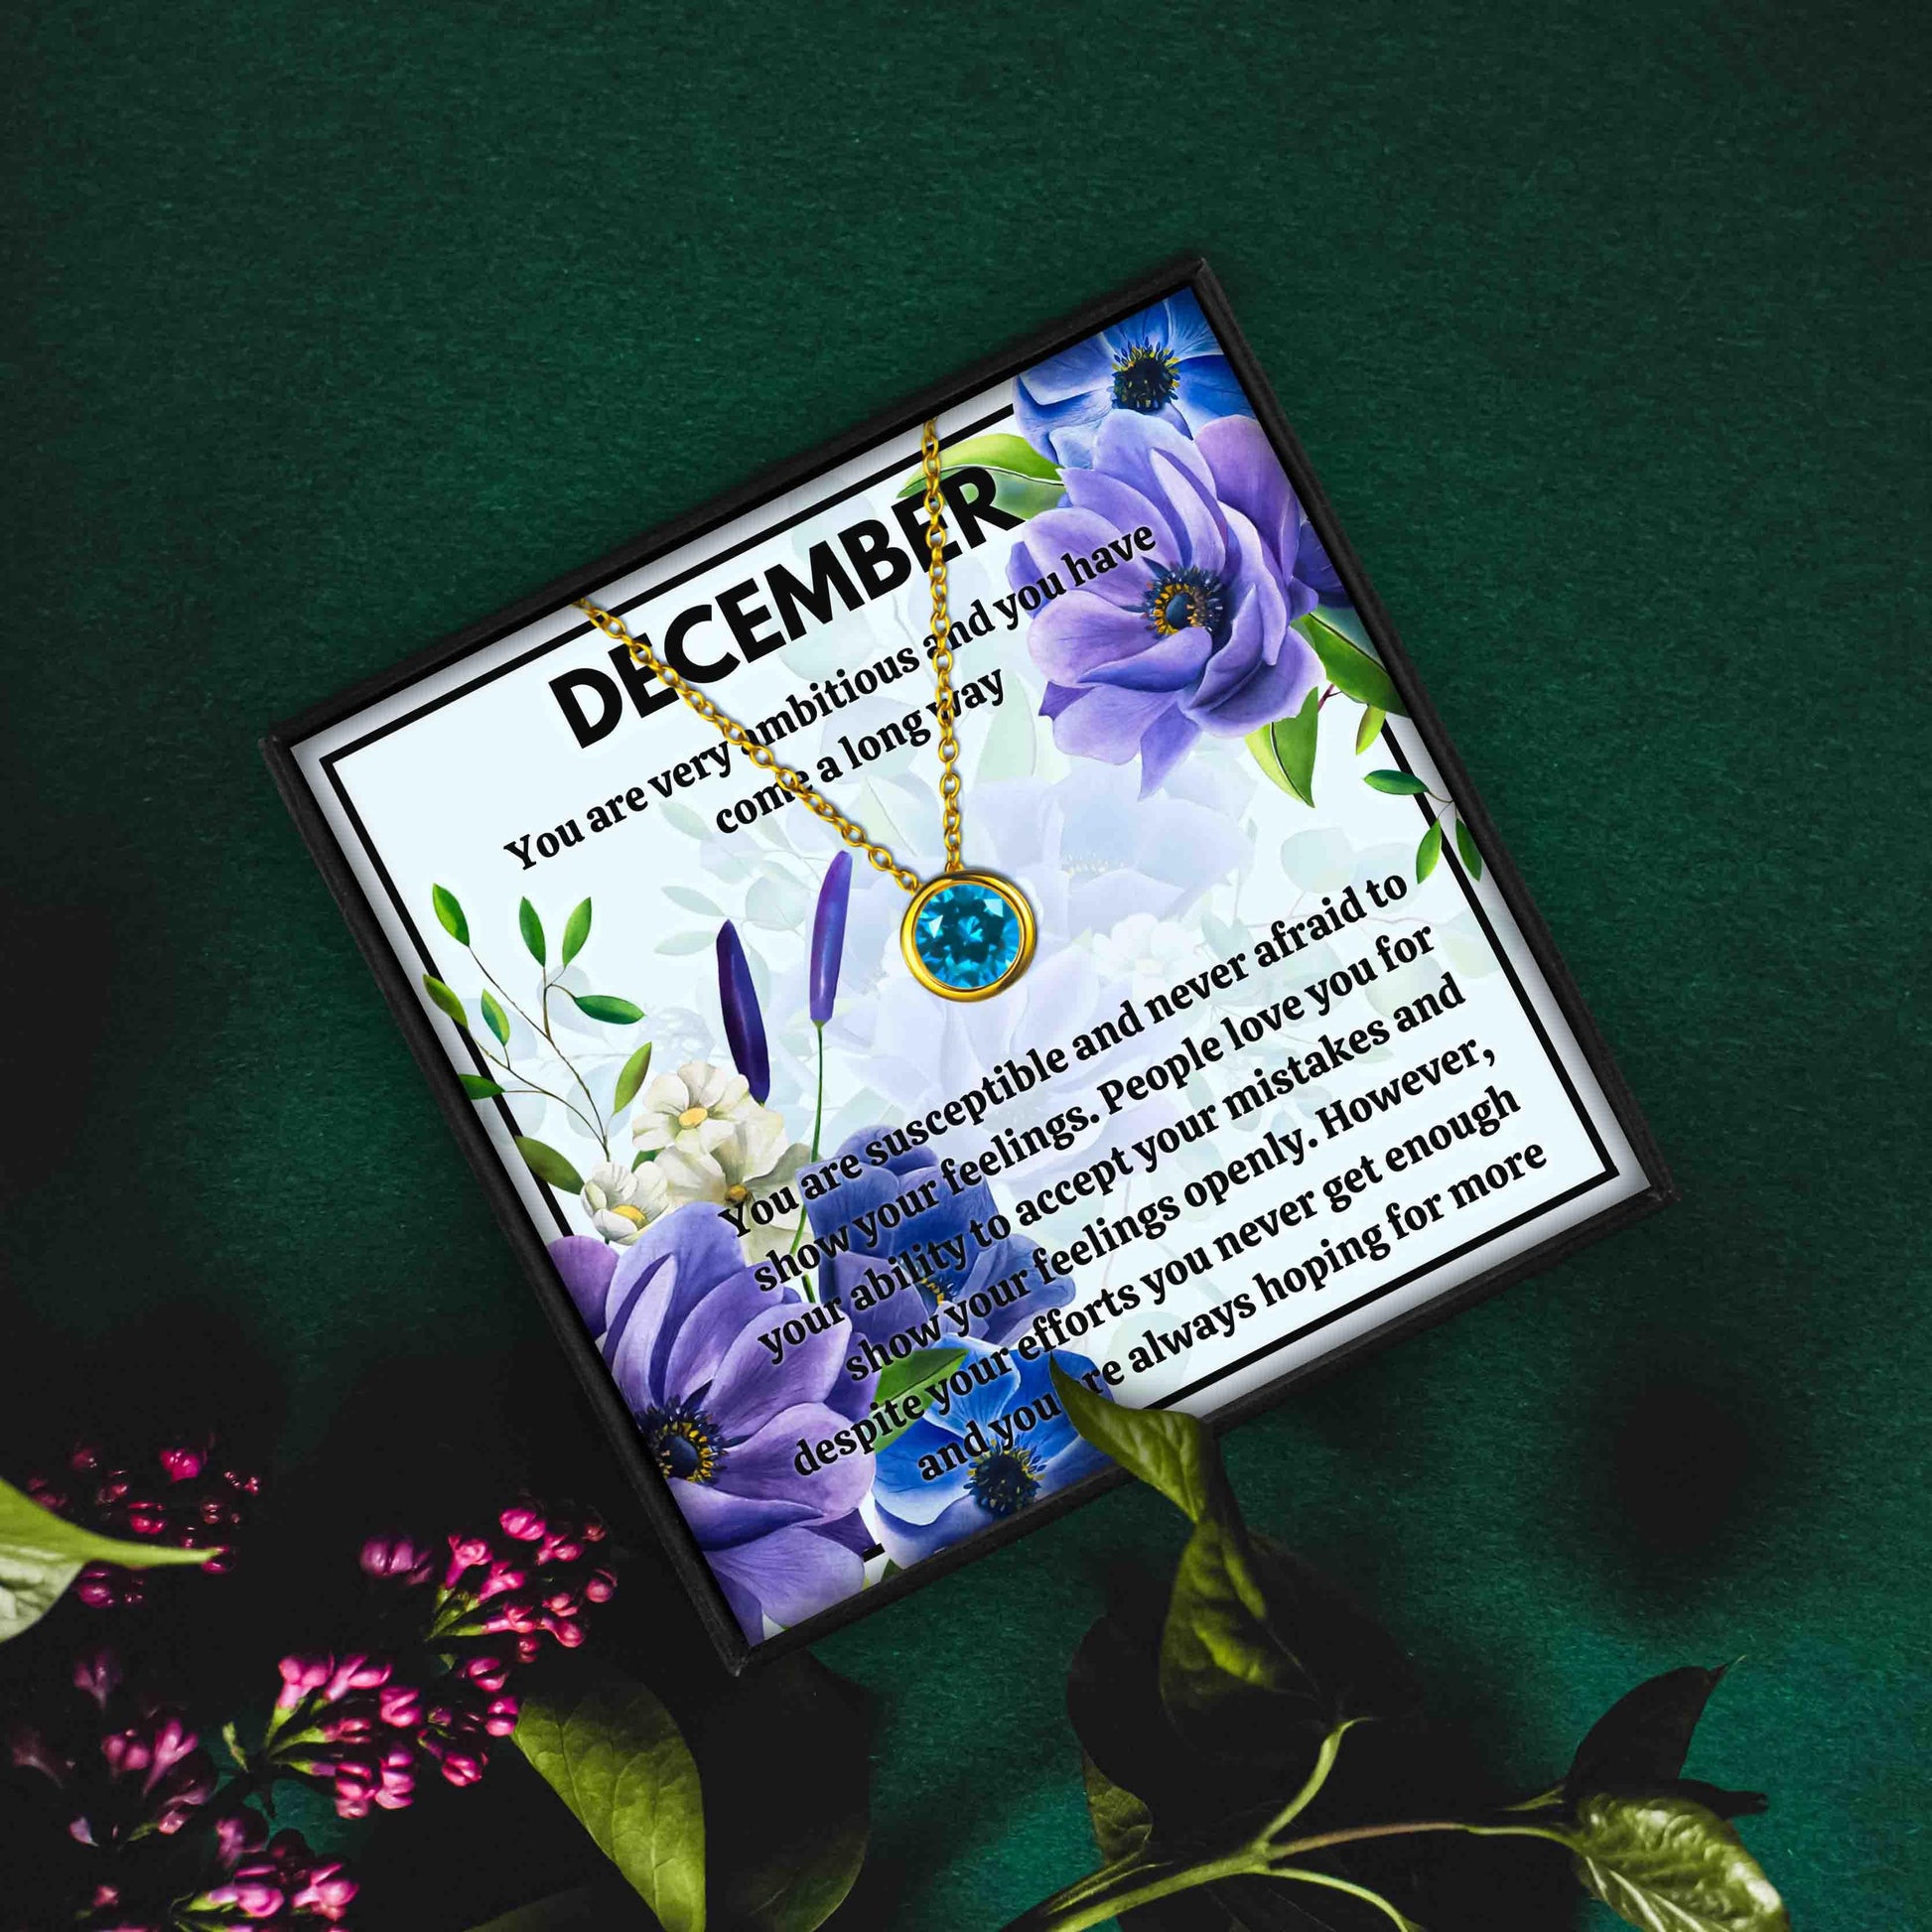 Meaningful December Birthstone Necklace Gift Set in 2023 | Meaningful December Birthstone Necklace Gift Set - undefined | december birthstone color, december birthstone jewelry, december birthstone meaning, december birthstone necklace, turquoise birthstone necklace | From Hunny Life | hunnylife.com